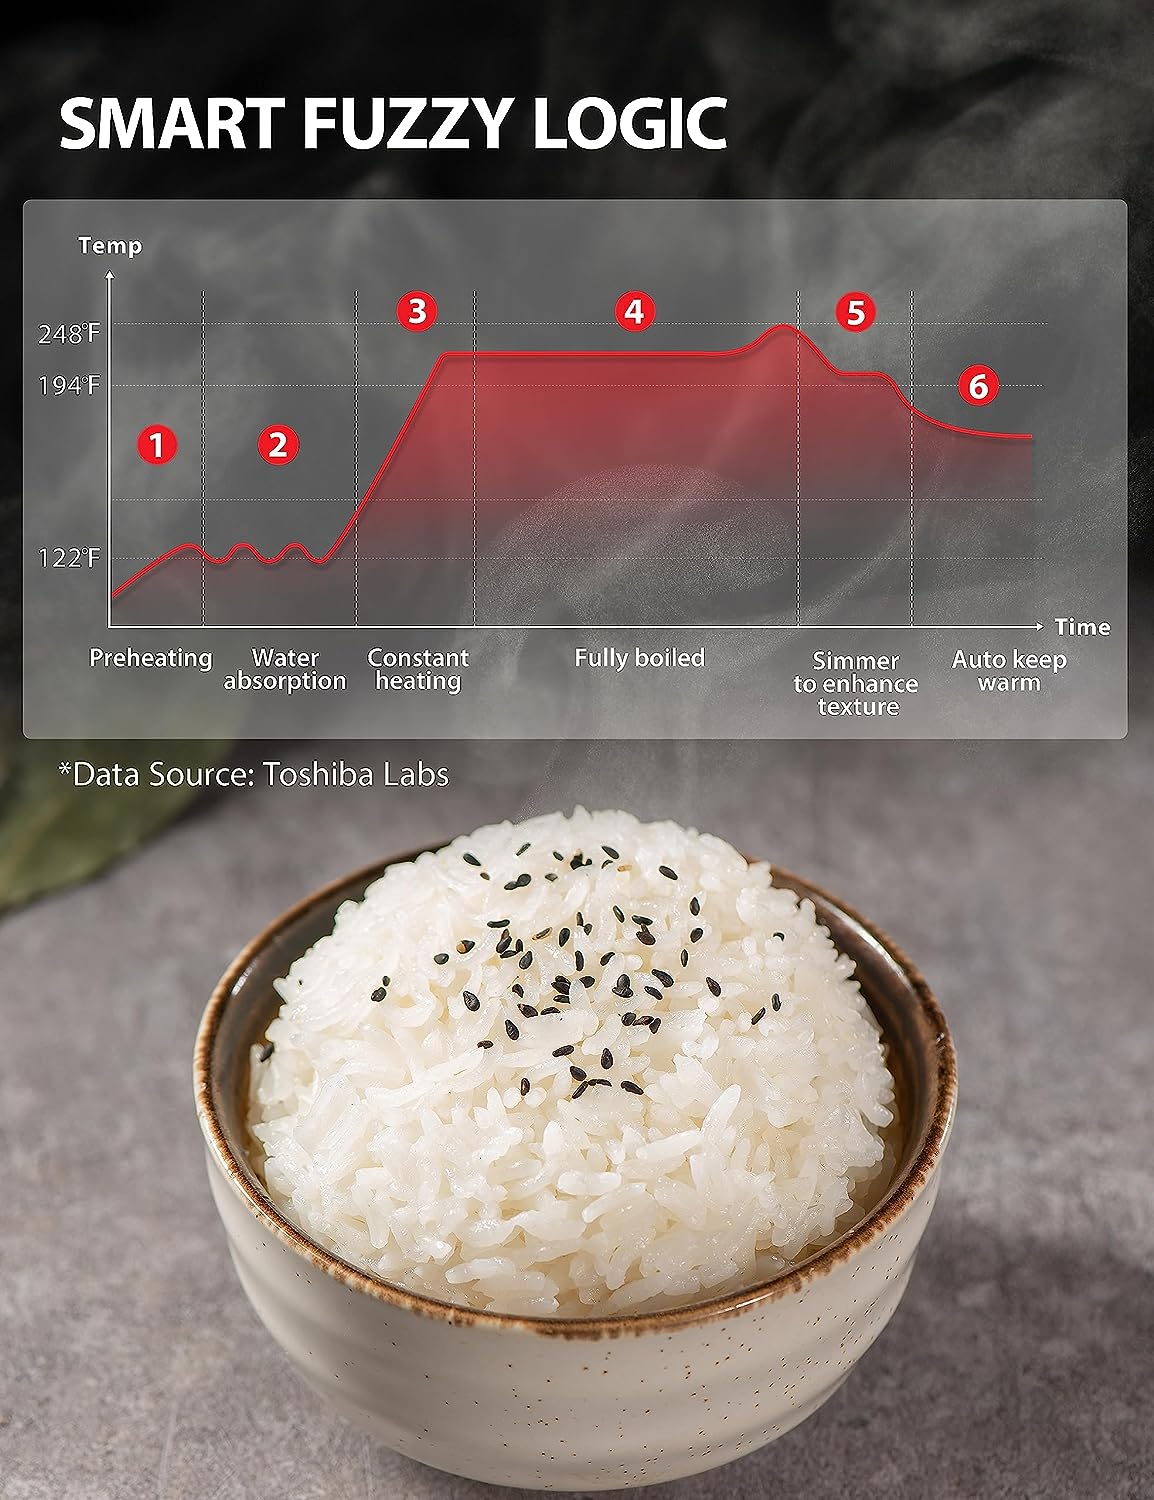 https://bigbigmart.com/wp-content/uploads/2023/08/Toshiba-Induction-Low-Carb-Rice-Cooker-Steamer-5.5-Cups-Uncooked-%E2%80%93-Japanese-Rice-Cooker-with-Fuzzy-Logic-Technology-8-Cooking-Functions-24-Hr-Timer-and-Auto-Keep-Warm-White6.jpg